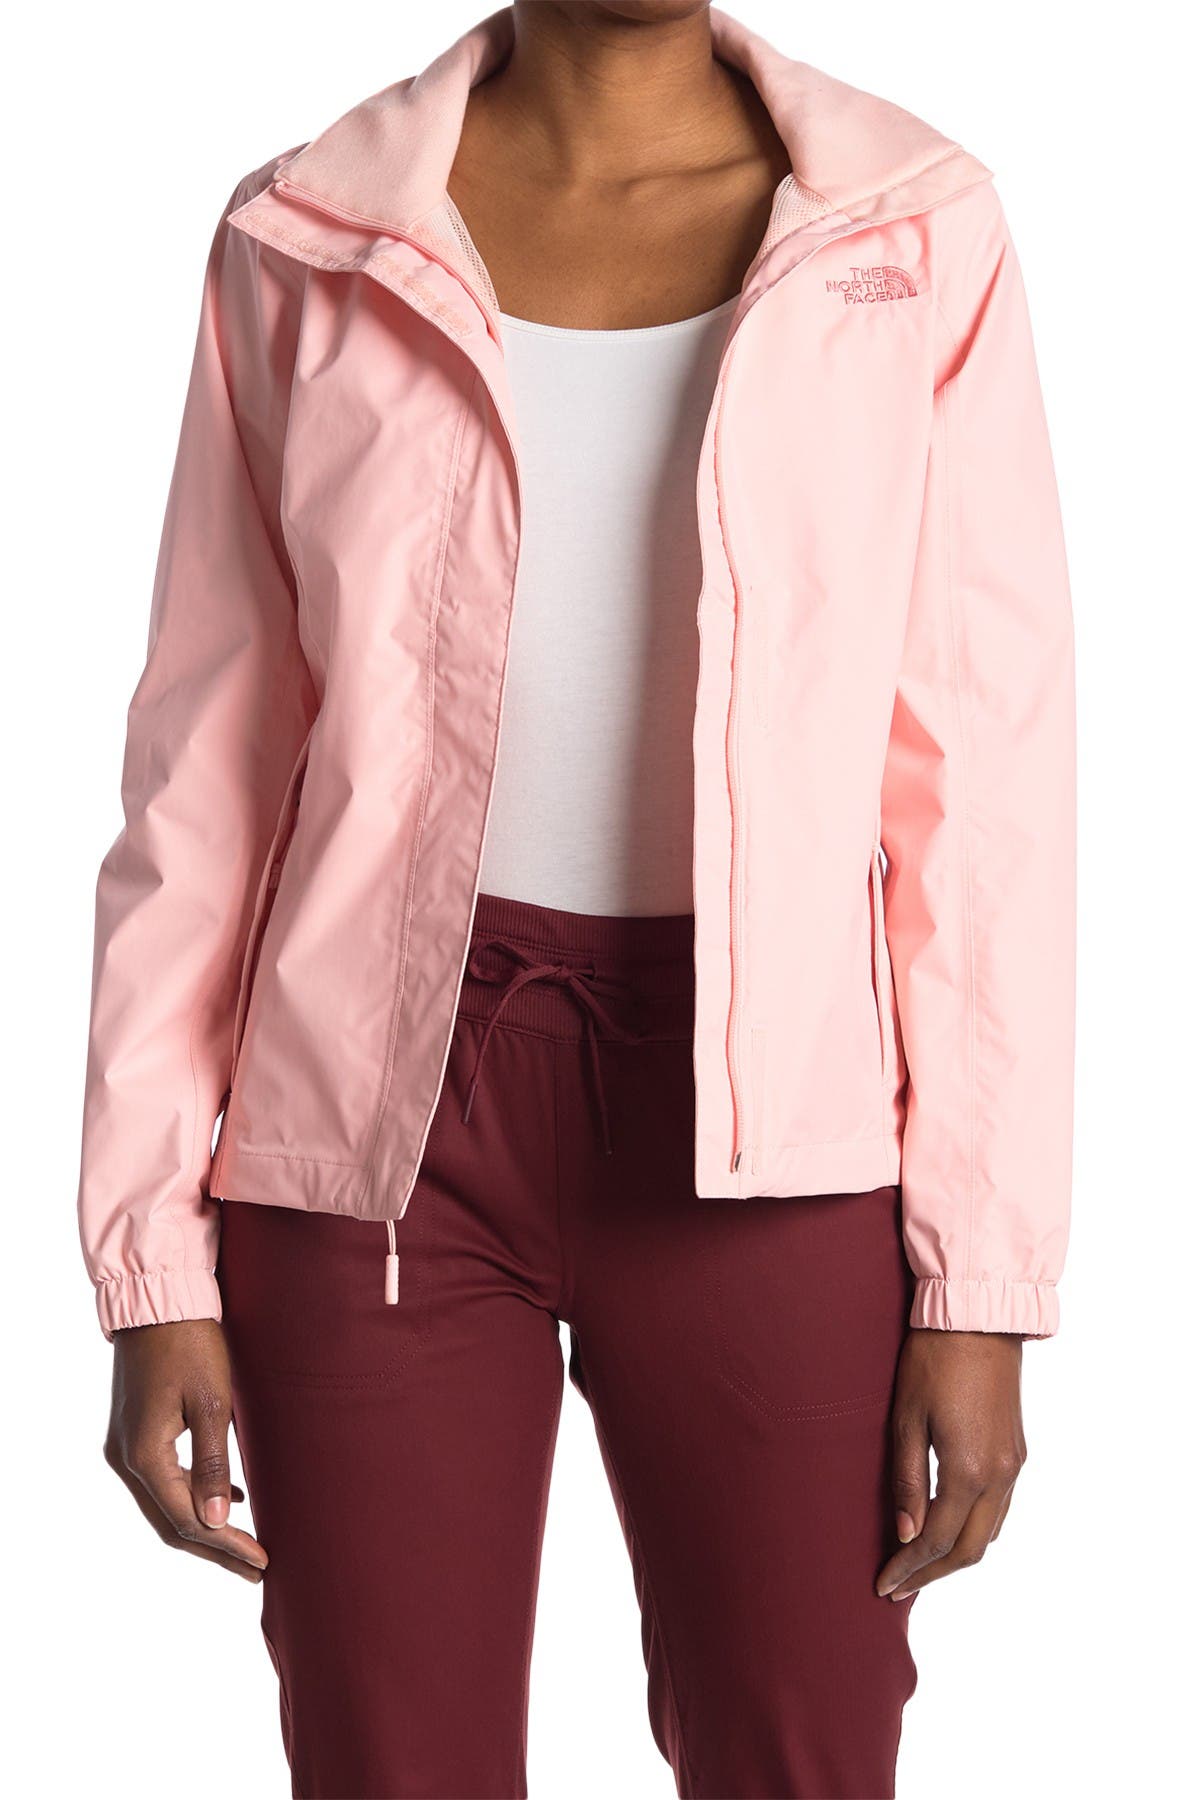 nordstrom north face womens jacket